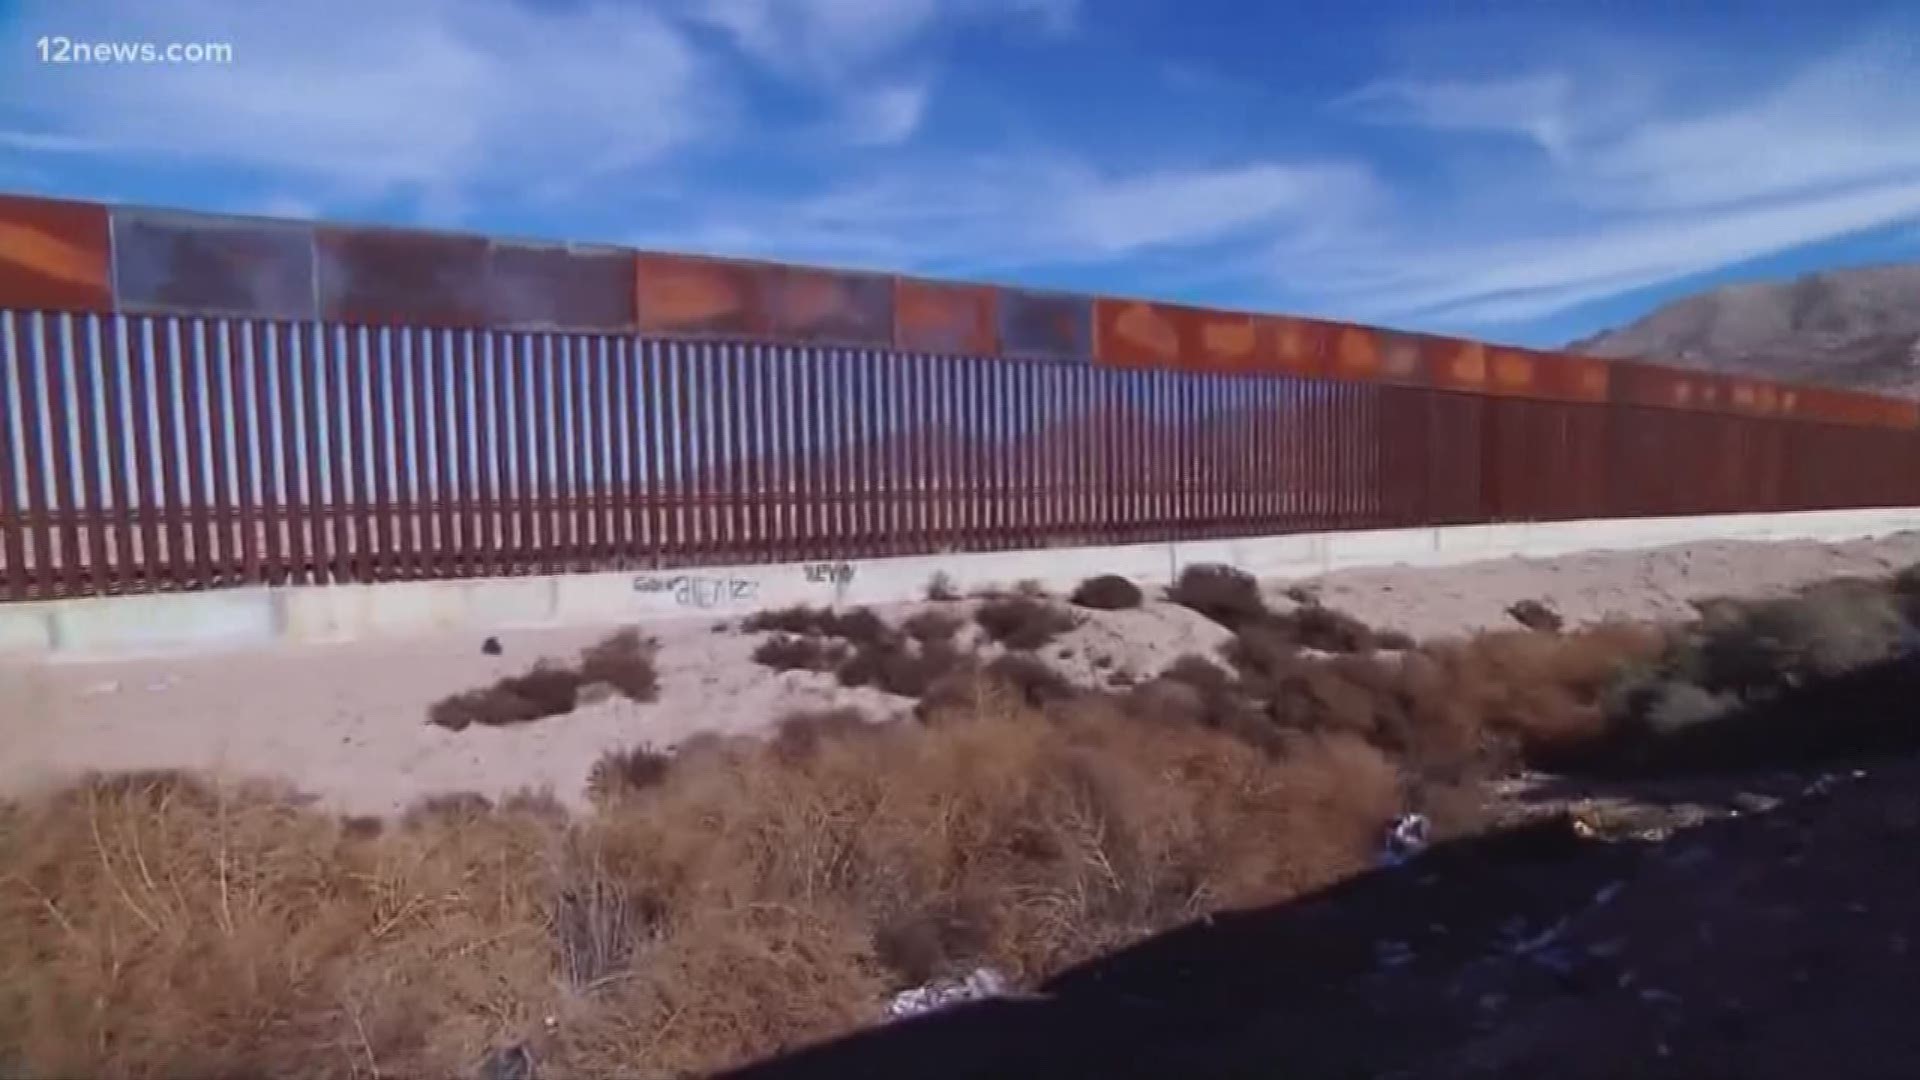 Arizona lawmakers on Capitol Hill split along party lines when it comes to supporting President Trump's emergency declaration to get funding for a border wall.